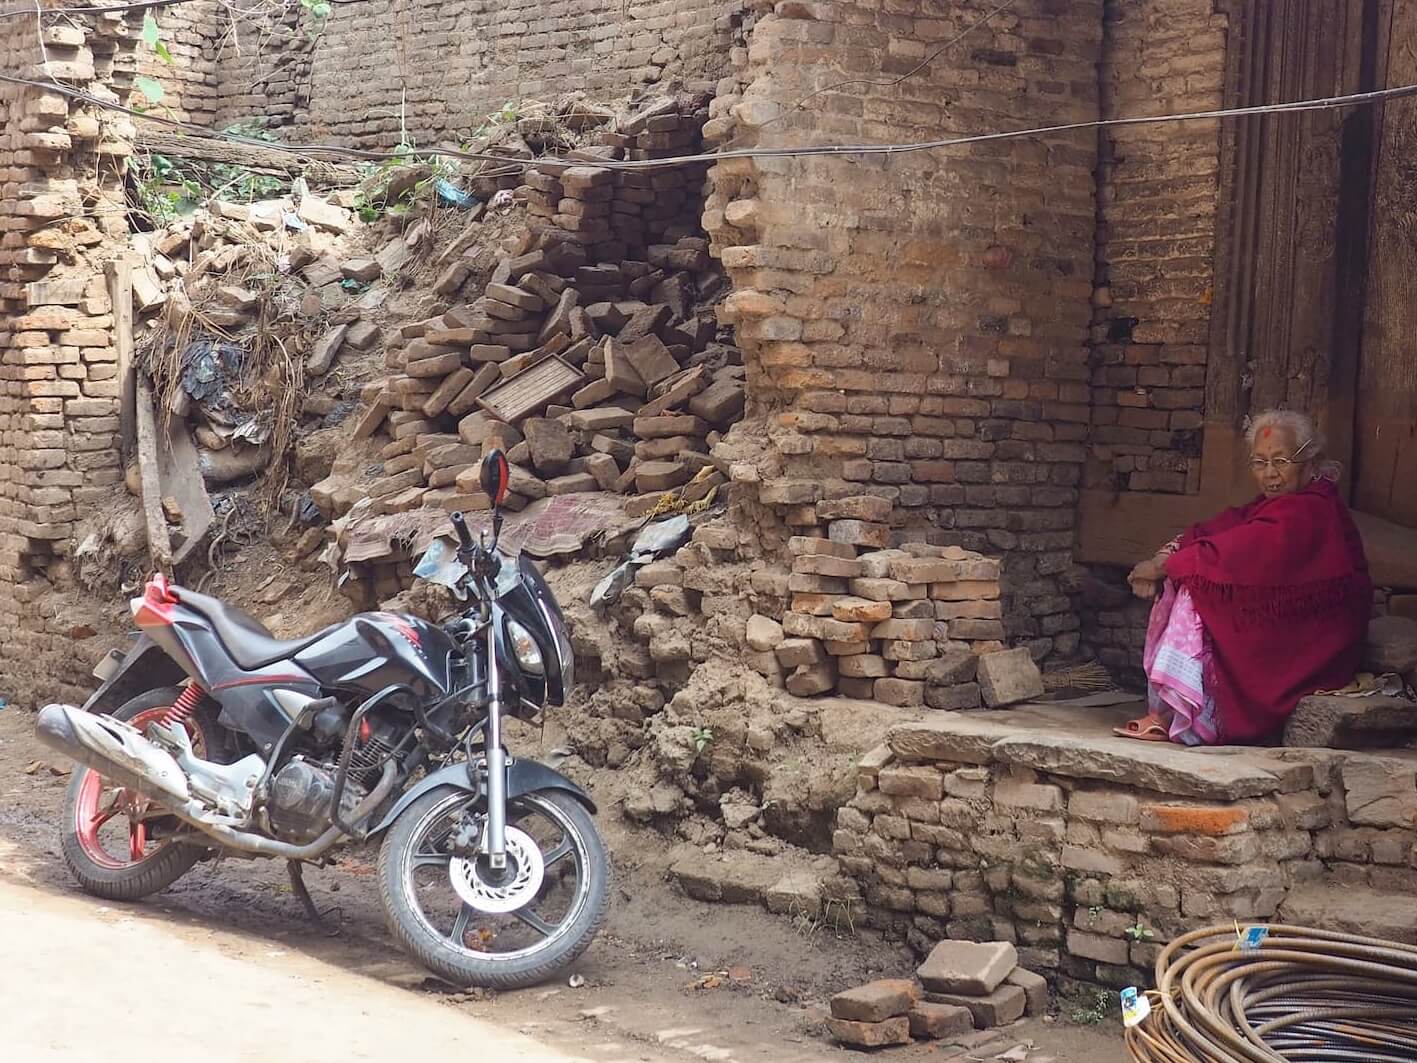 A woman in red clothing sits in a doorstep next to rubble and a motorcycle